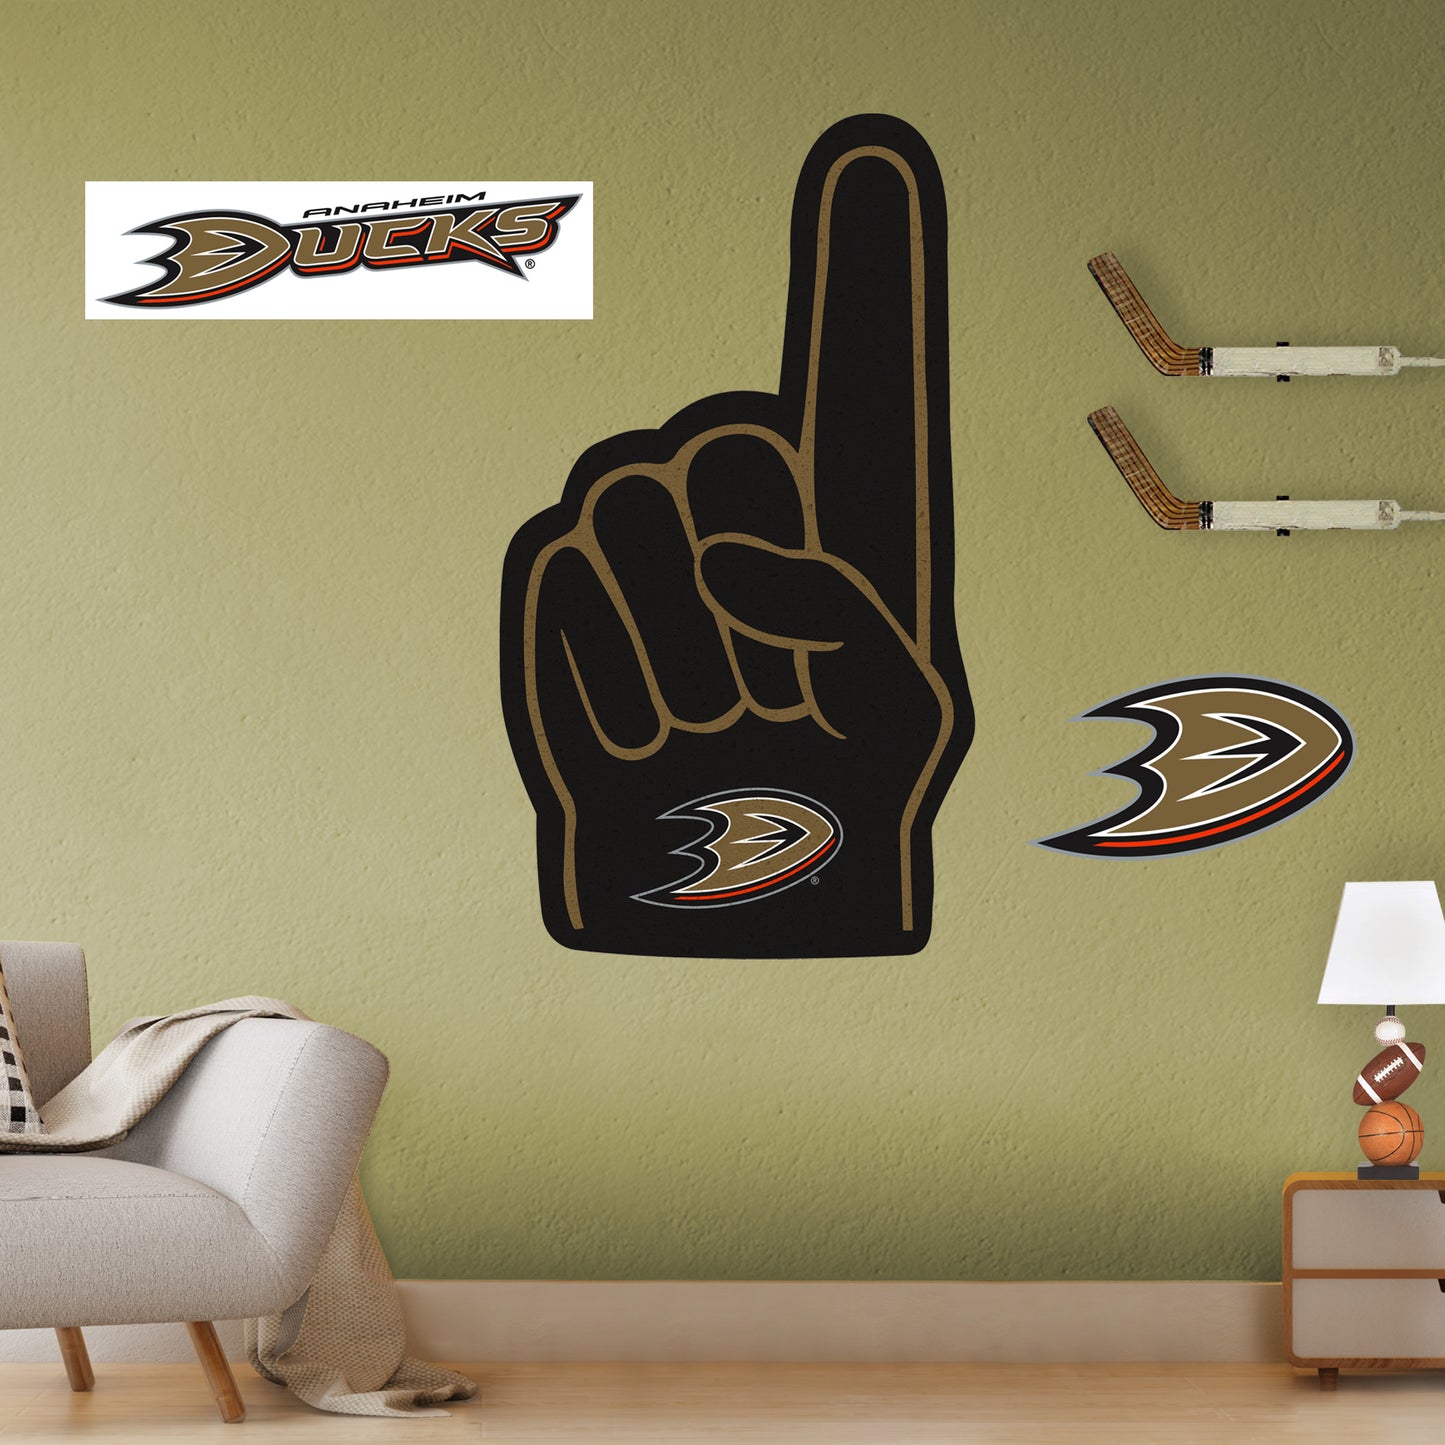 Anaheim Ducks:    Foam Finger        - Officially Licensed NHL Removable     Adhesive Decal